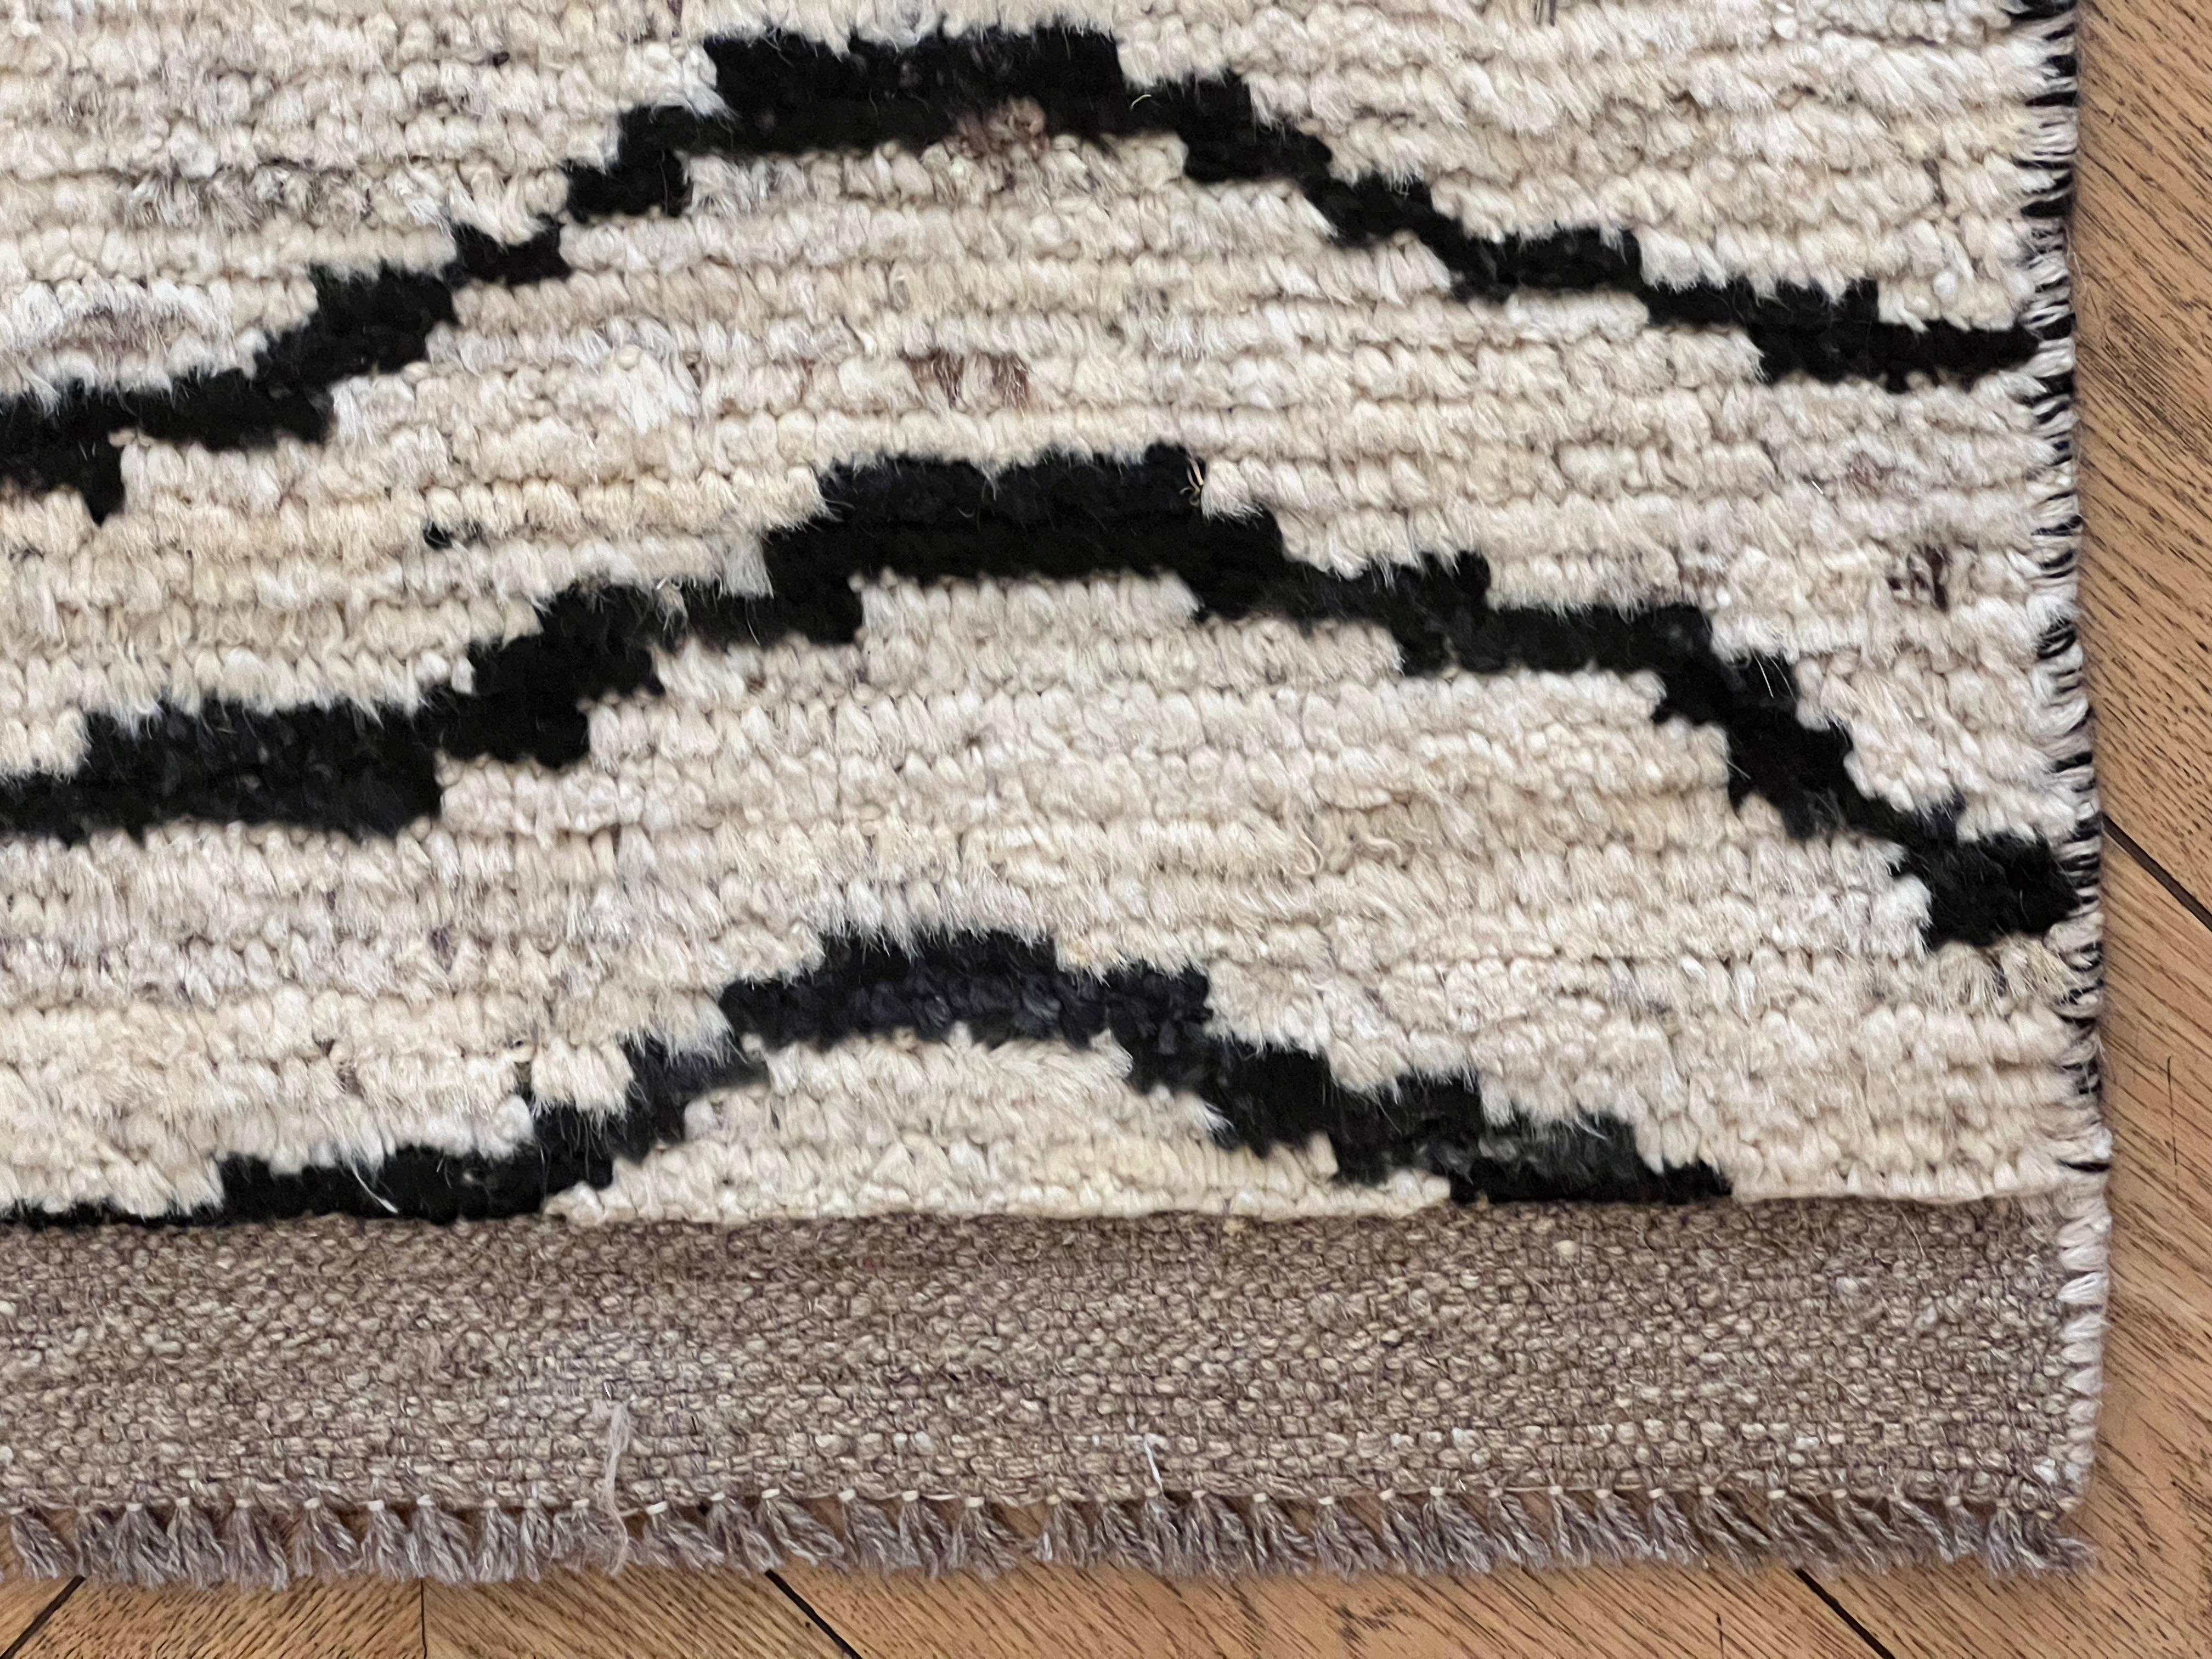 Wool 21st Century Tiger Black and White Afghan Runner Rug, Ca 2021 For Sale